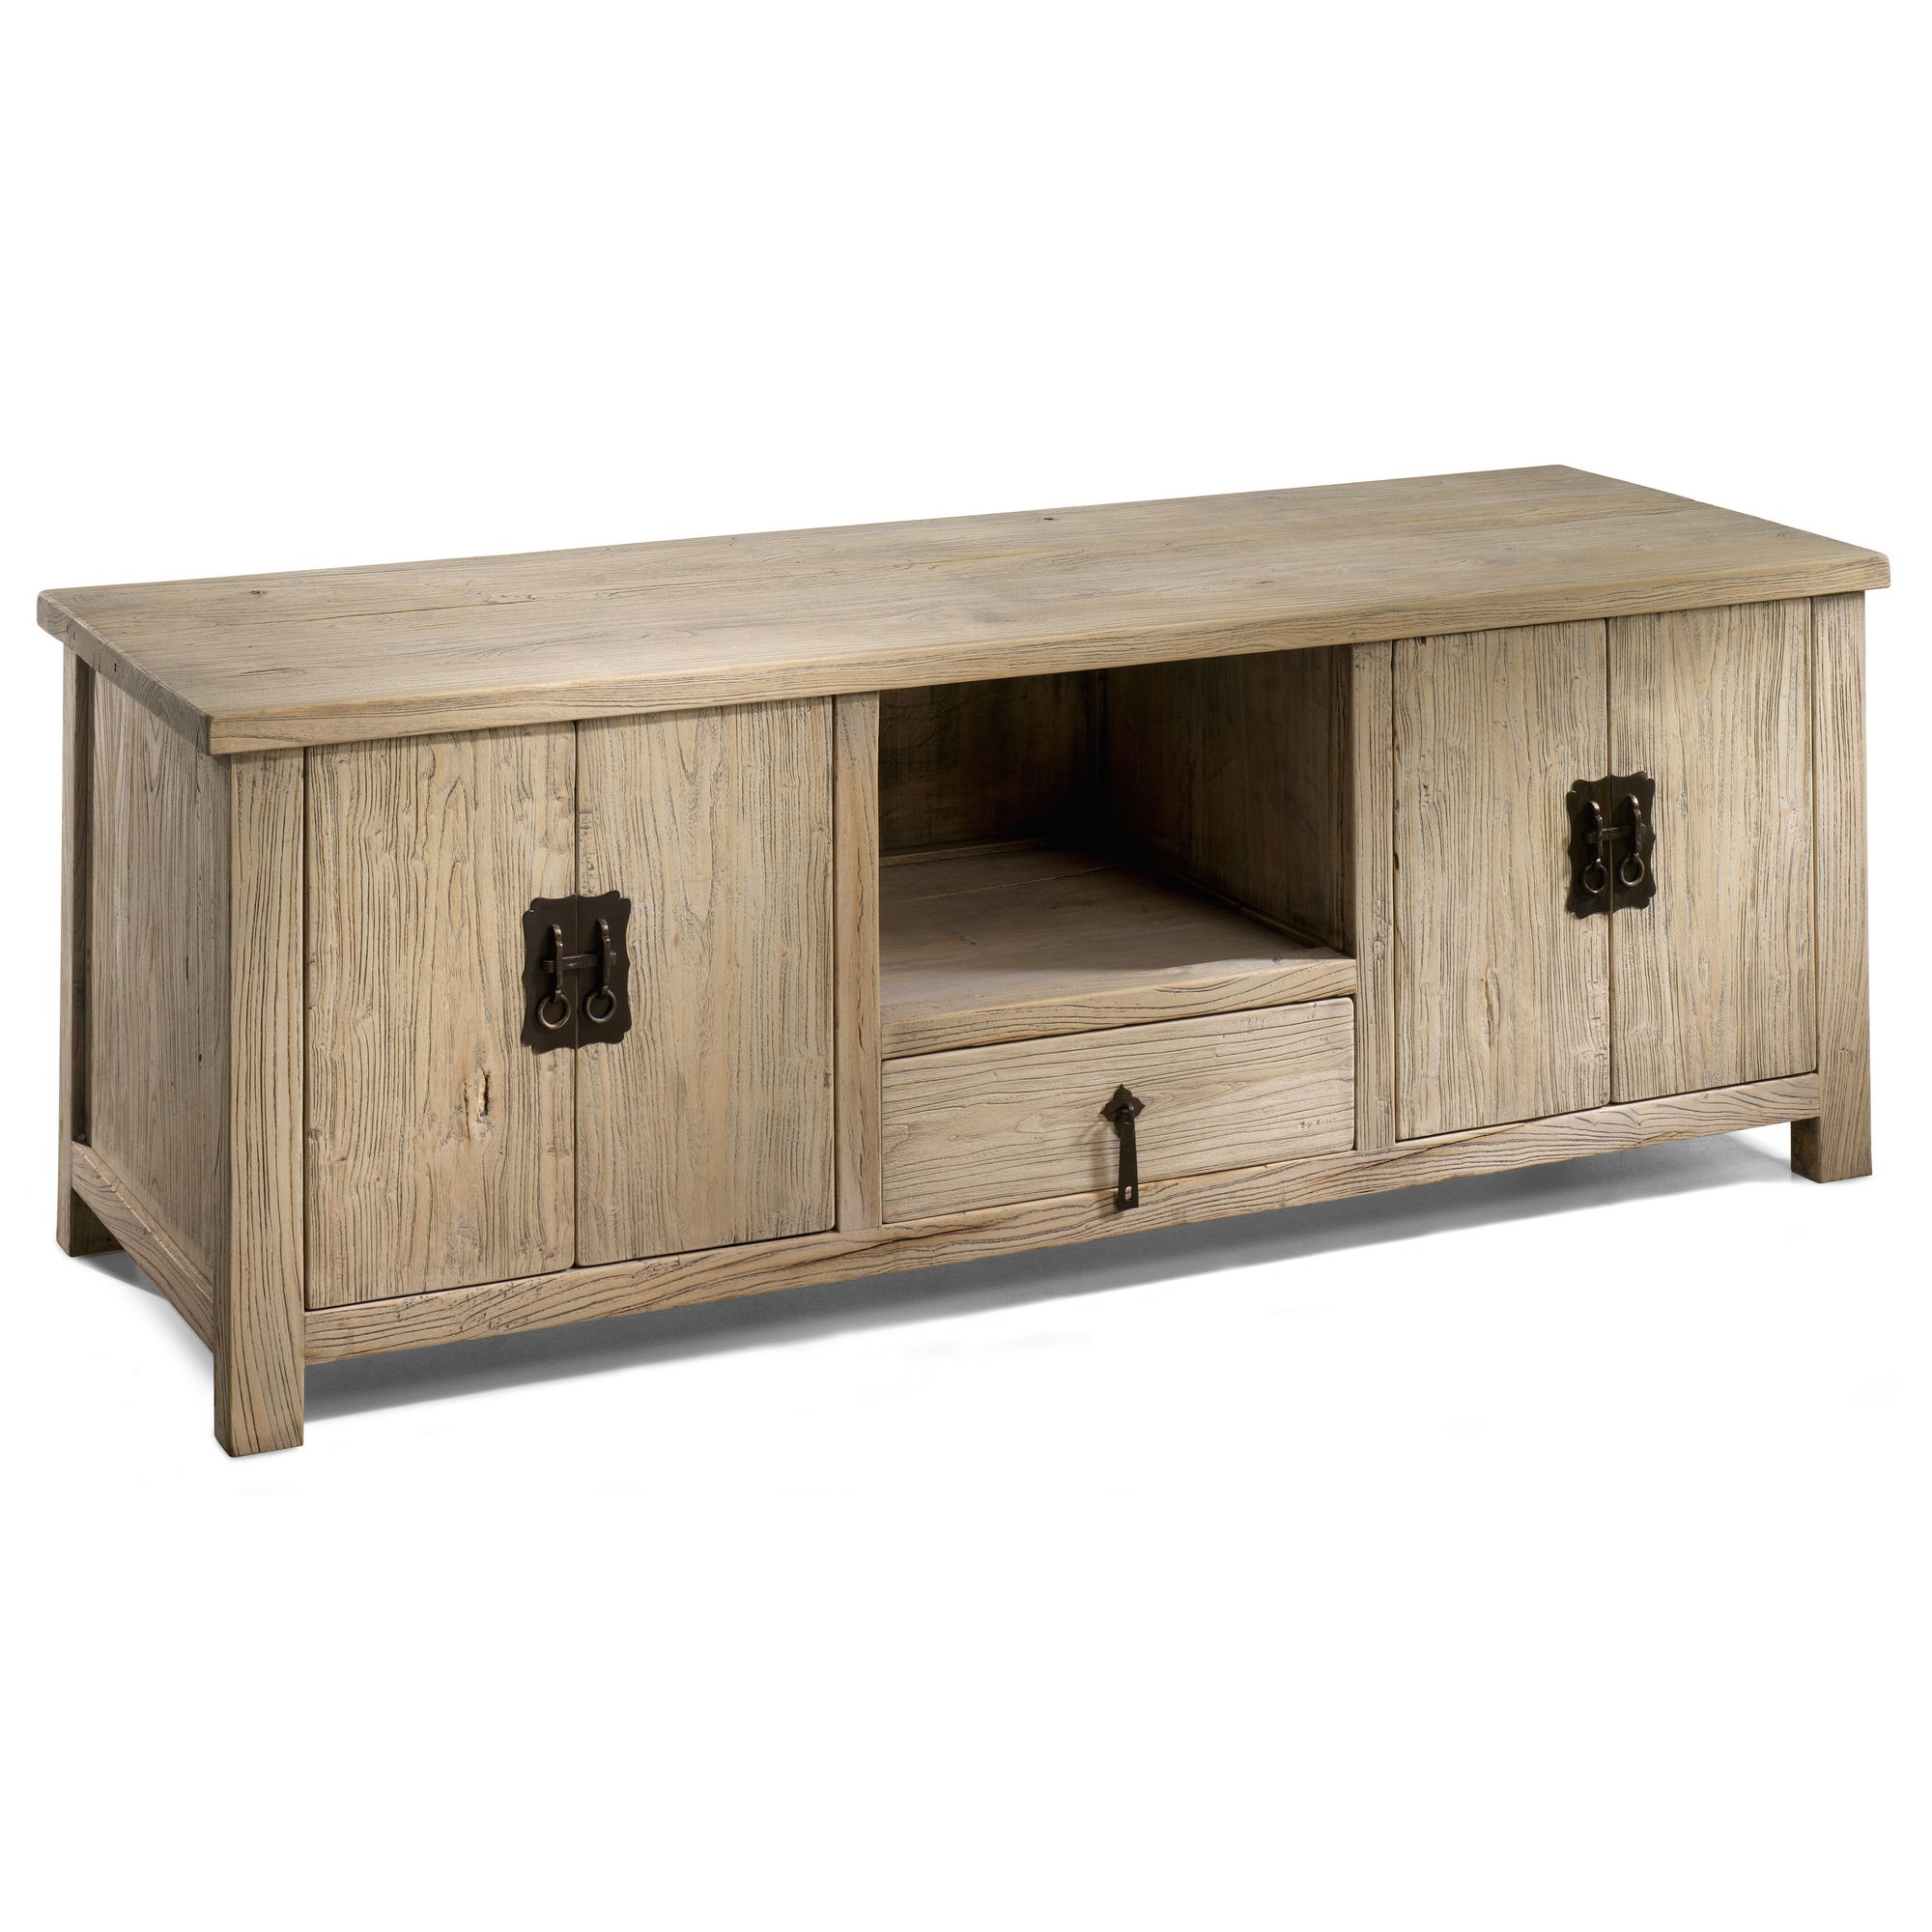 Shimu Chinese Country Furniture Media Console at Tescos Direct